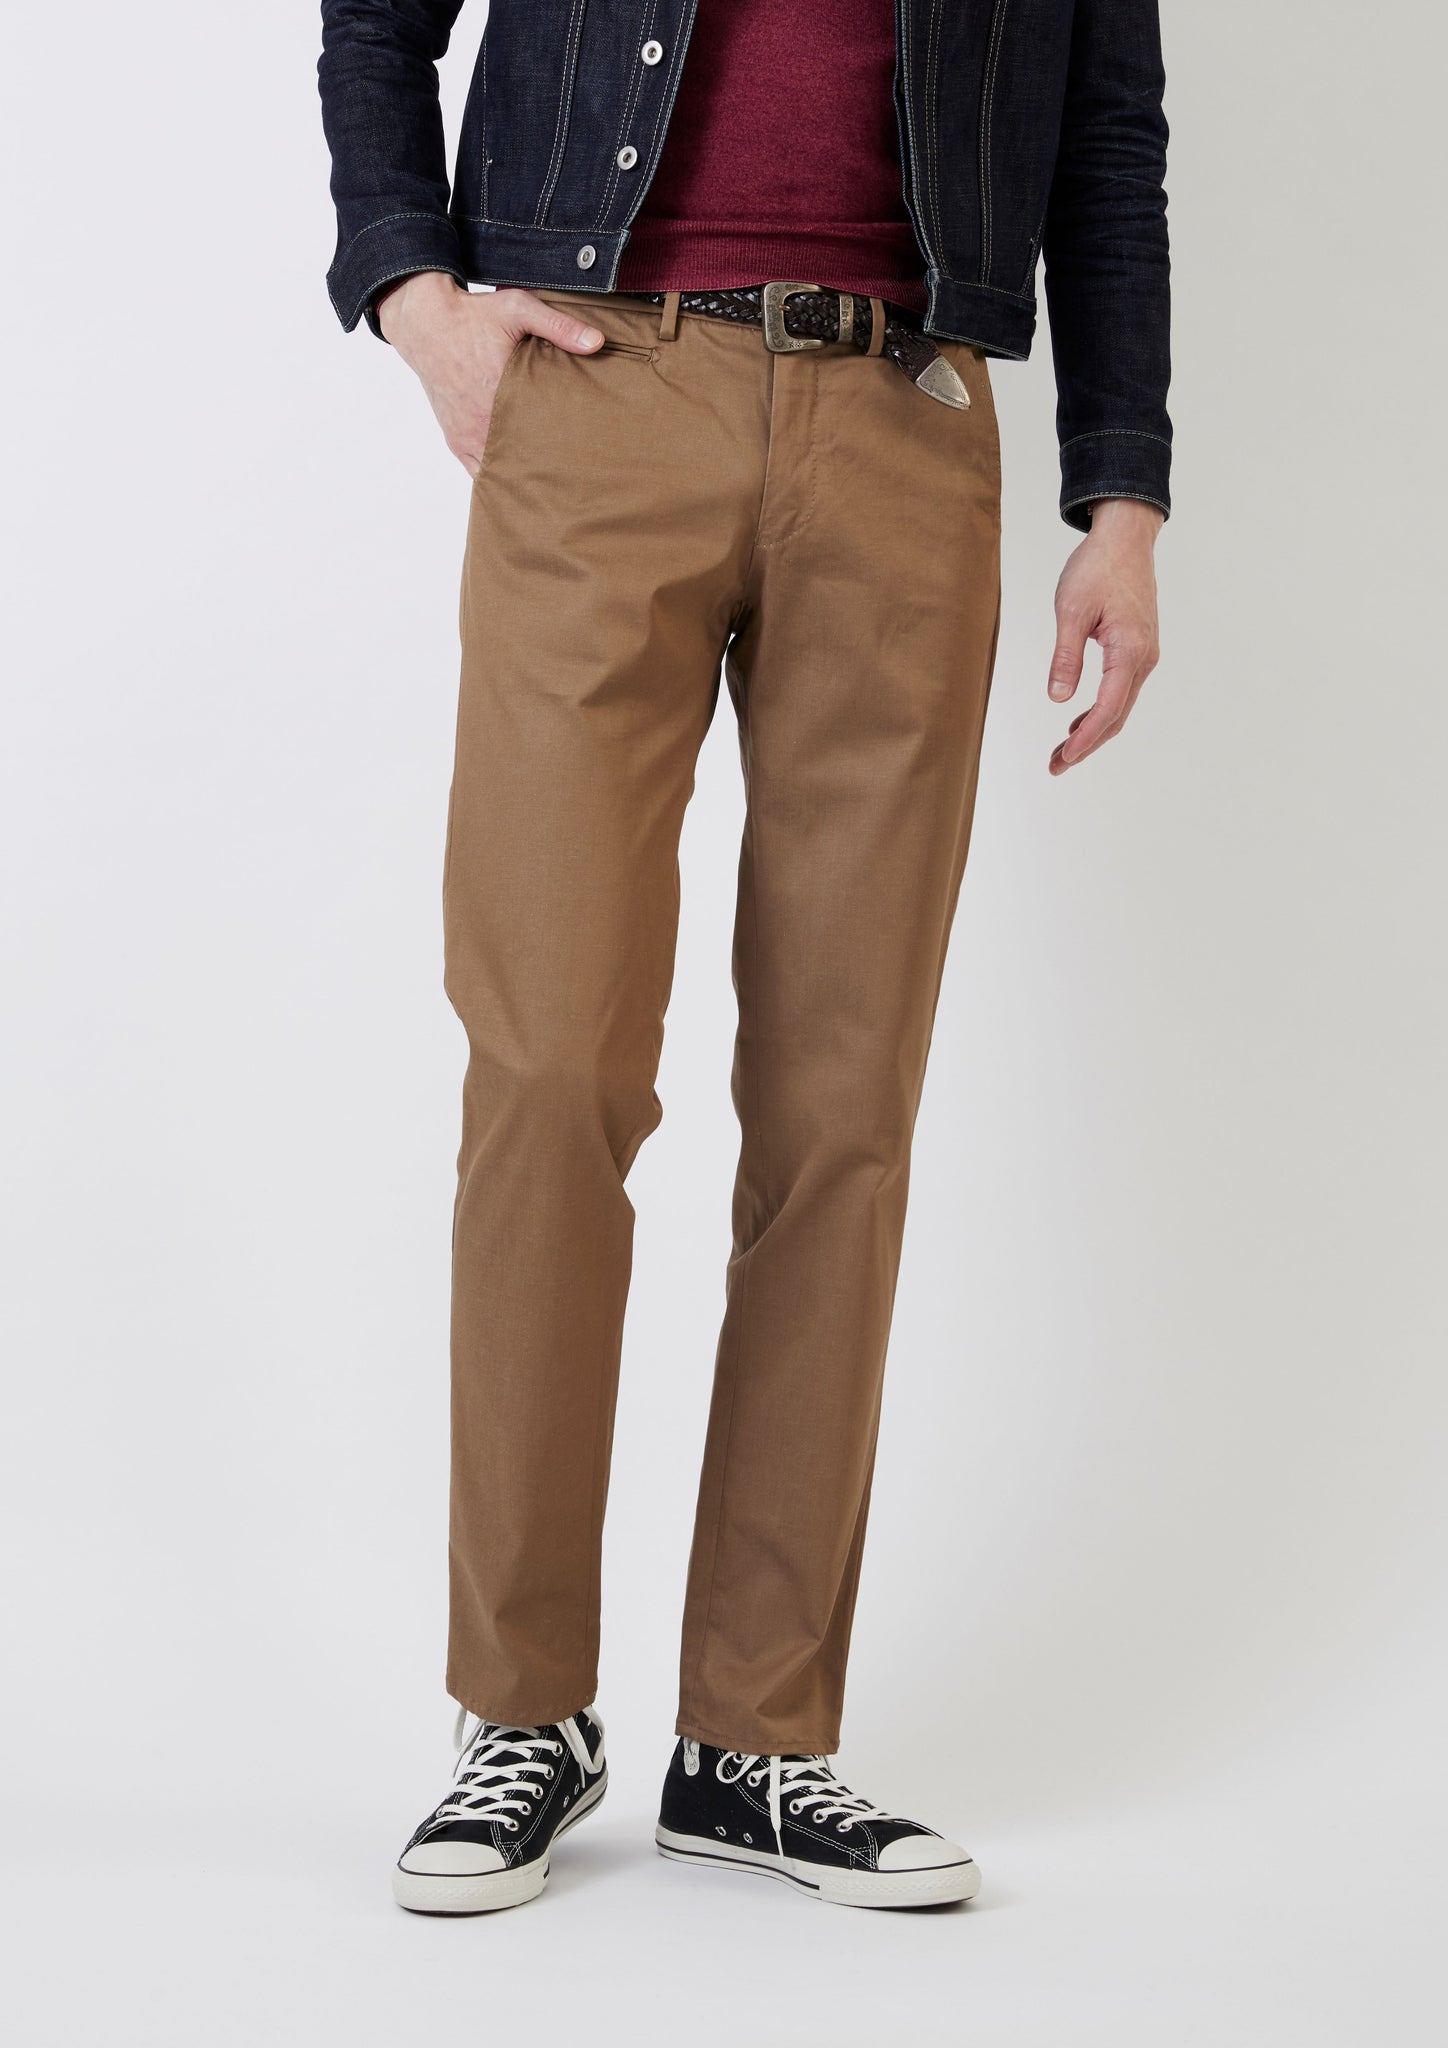 TCR2330201-86 10th Anniversary limited chino – The Chino Revived